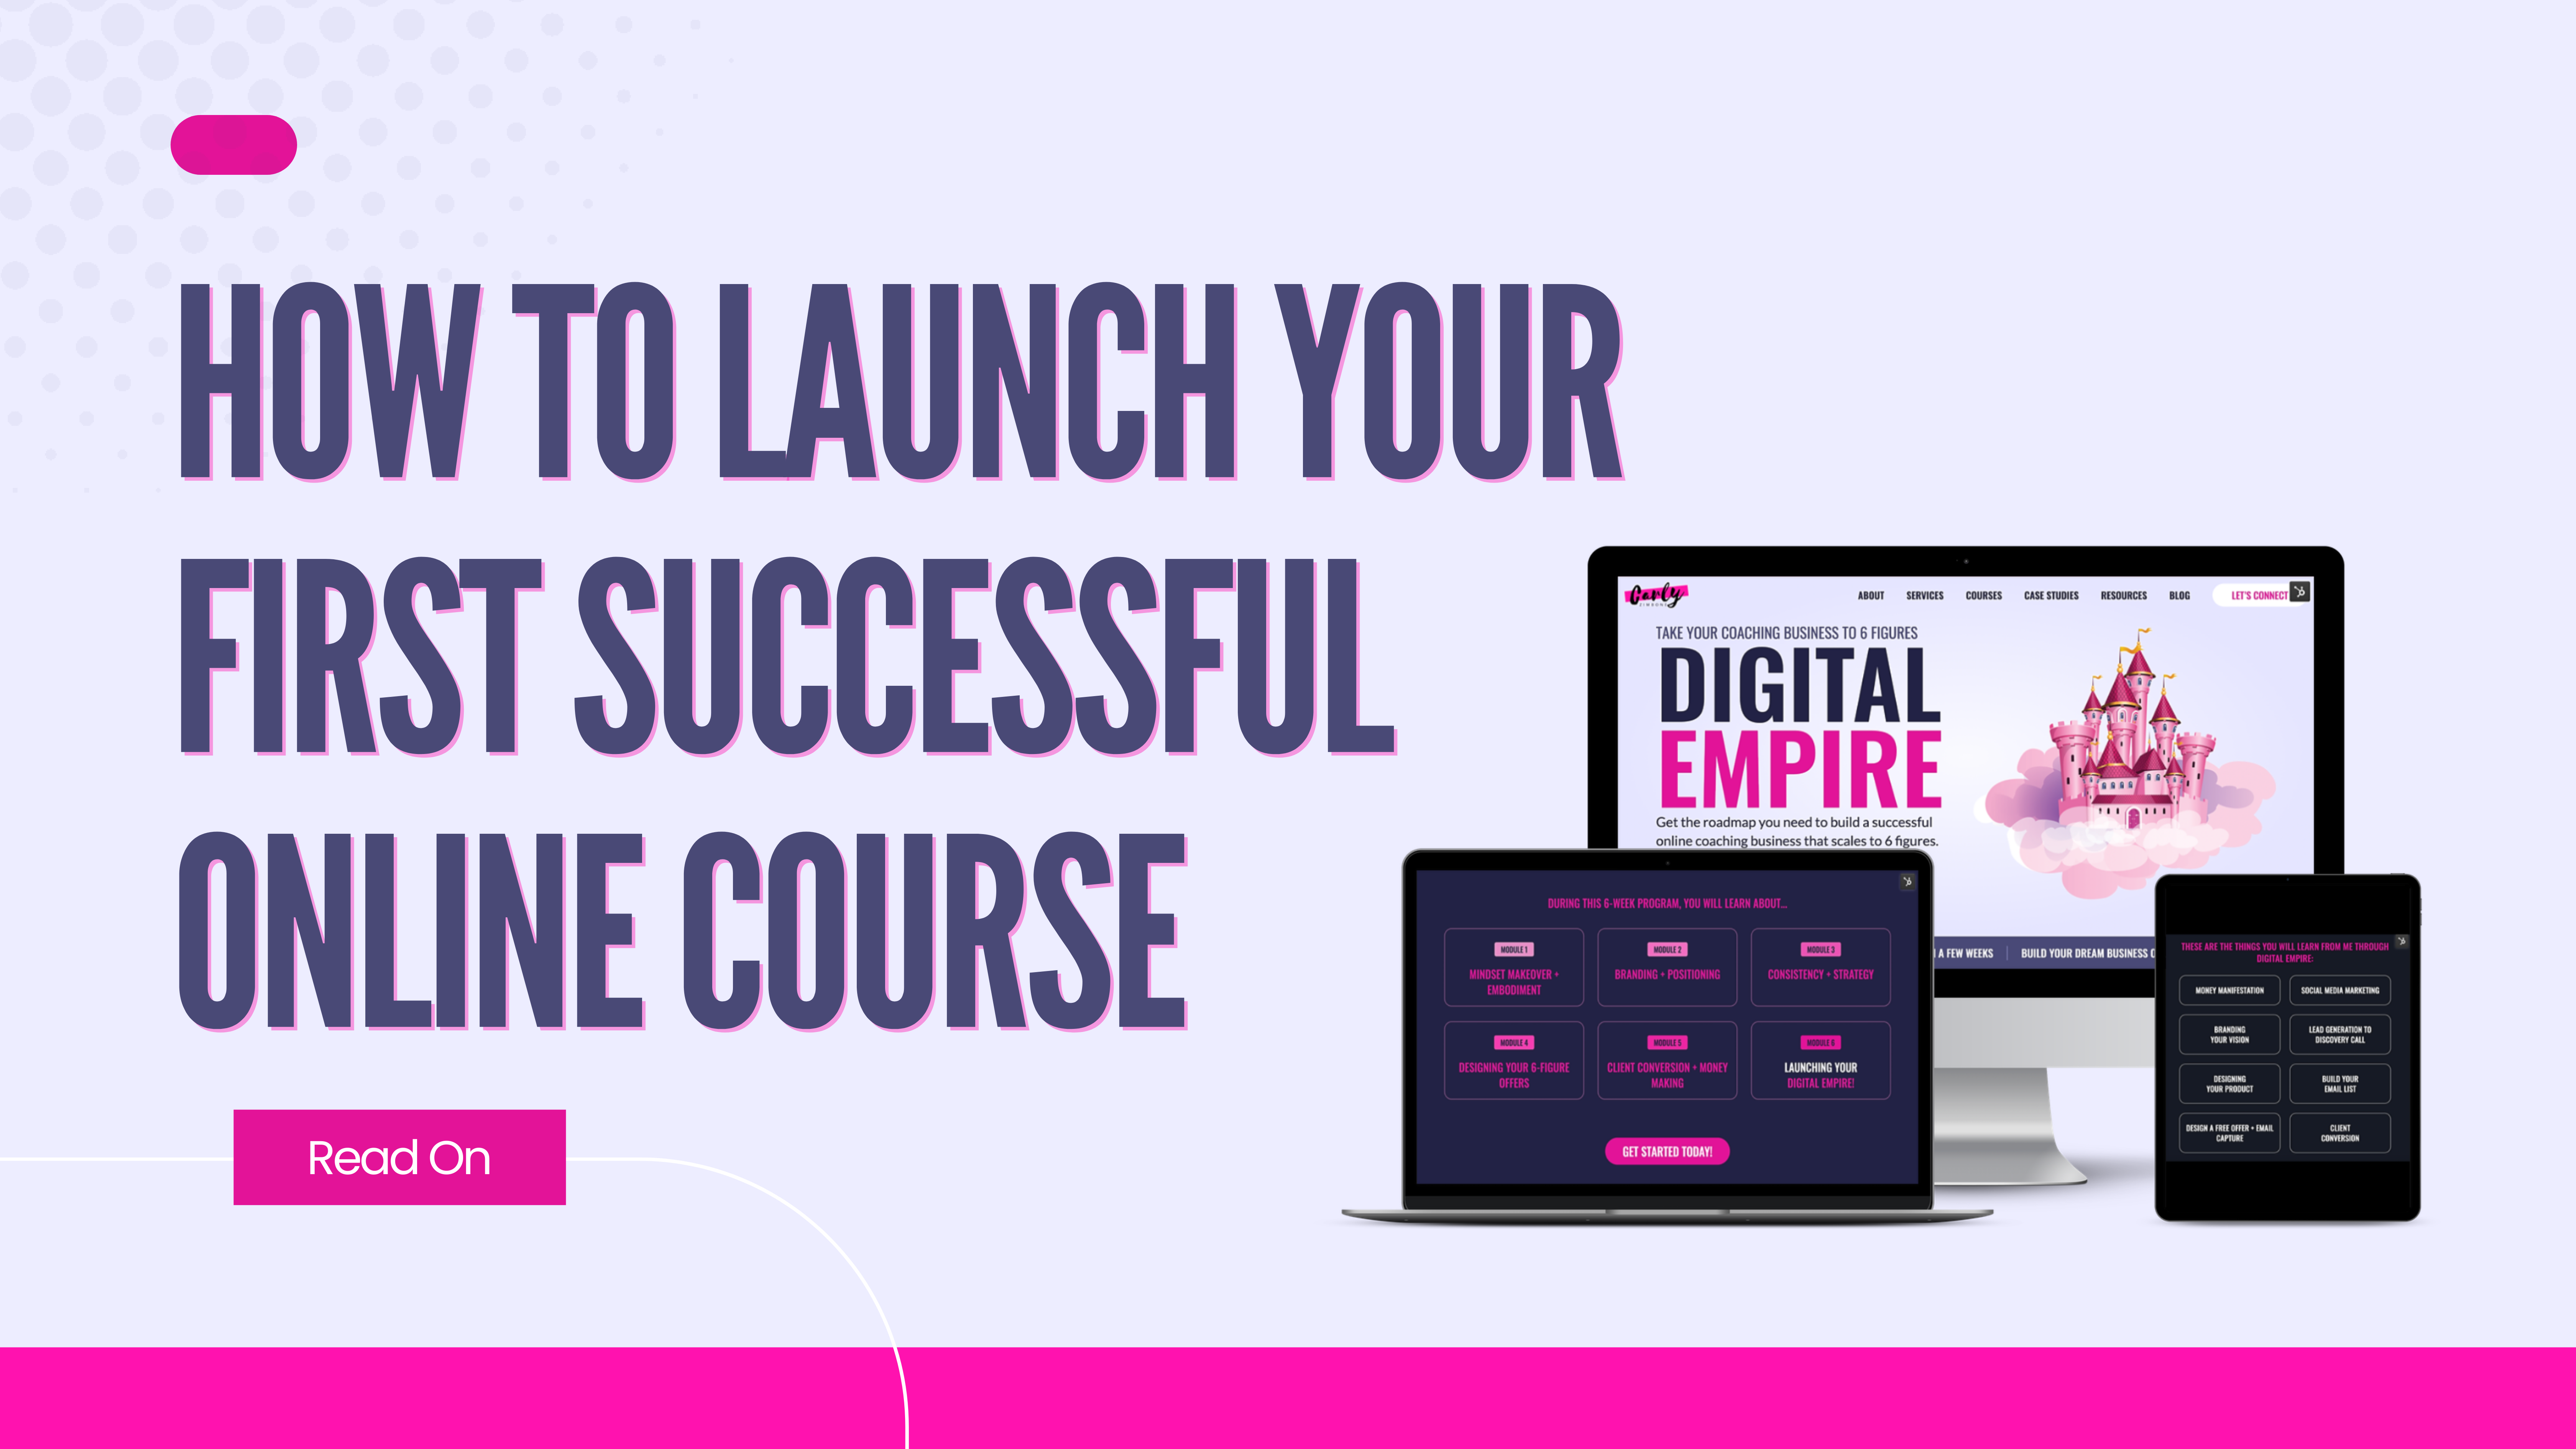 How to Launch Your First Successful Online Course